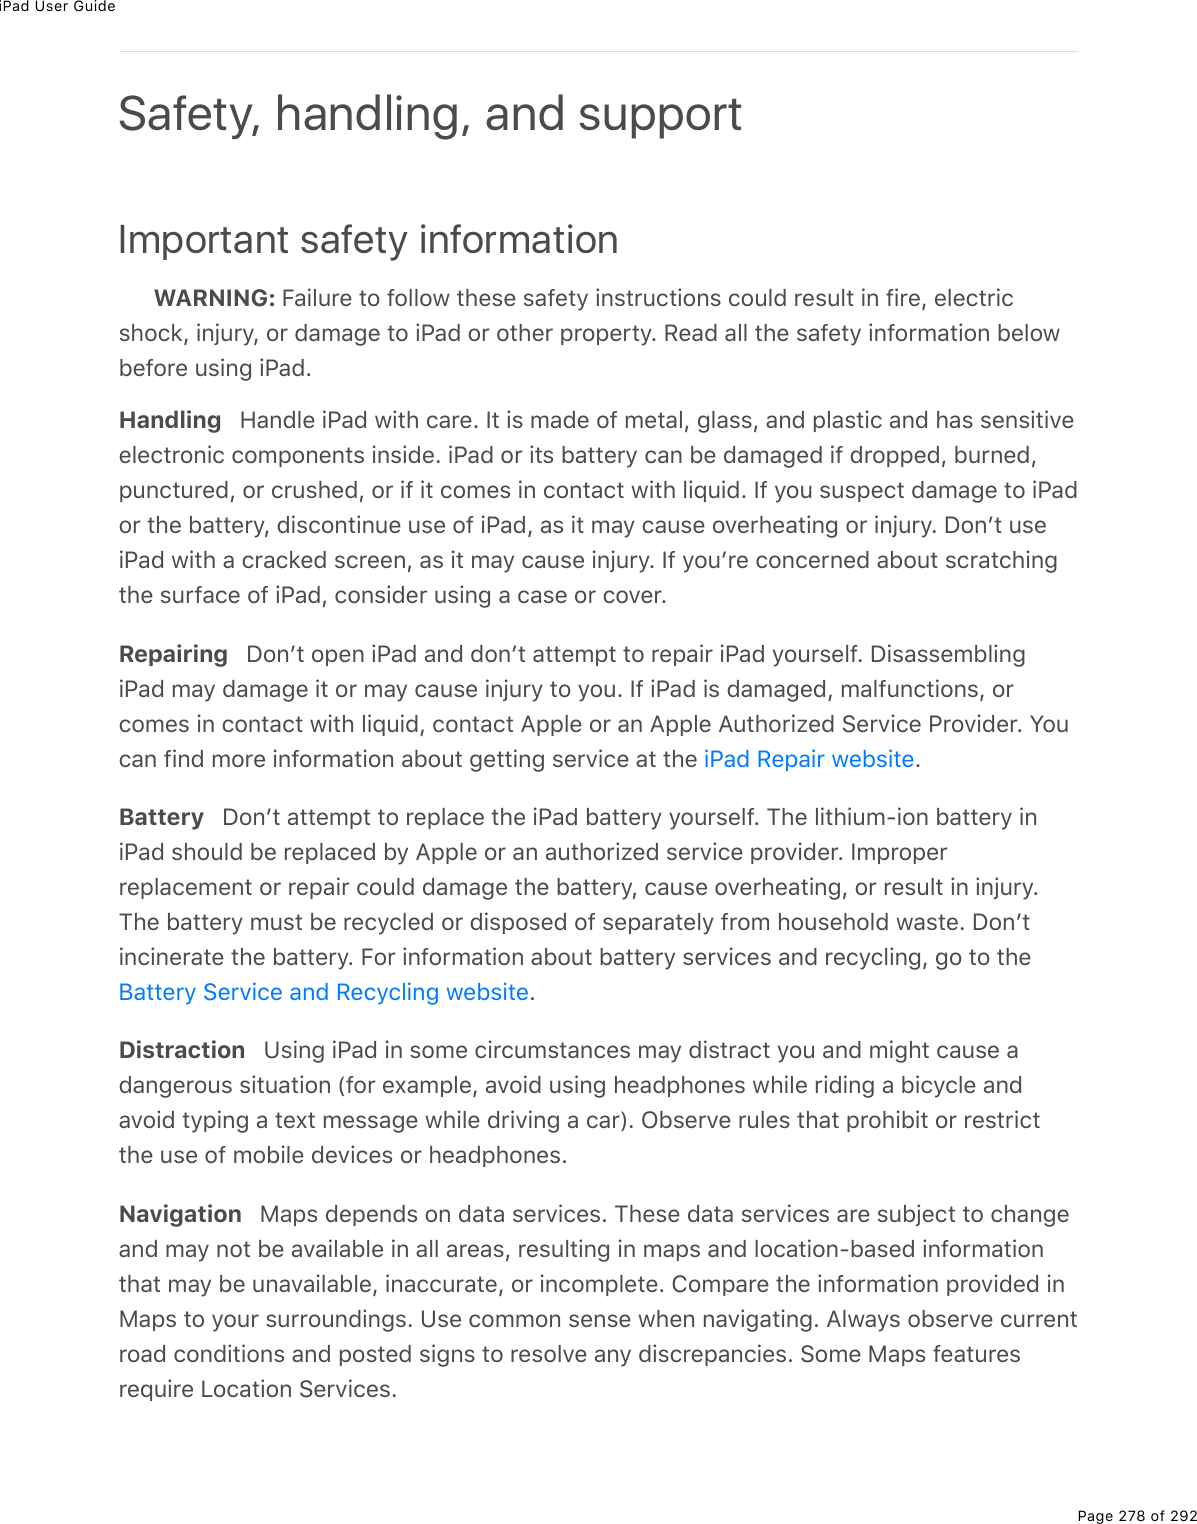 iPad User GuidePage 278 of 292Important safety informationWARNING: Failure to follow these safety instructions could result in fire, electricshock, injury, or damage to iPad or other property. Read all the safety information belowbefore using iPad.Handling   Handle iPad with care. It is made of metal, glass, and plastic and has sensitiveelectronic components inside. iPad or its battery can be damaged if dropped, burned,punctured, or crushed, or if it comes in contact with liquid. If you suspect damage to iPador the battery, discontinue use of iPad, as it may cause overheating or injury. Donʼt useiPad with a cracked screen, as it may cause injury. If youʼre concerned about scratchingthe surface of iPad, consider using a case or cover.Repairing   Donʼt open iPad and donʼt attempt to repair iPad yourself. DisassemblingiPad may damage it or may cause injury to you. If iPad is damaged, malfunctions, orcomes in contact with liquid, contact Apple or an Apple Authorized Service Provider. Youcan find more information about getting service at the  .Battery   Donʼt attempt to replace the iPad battery yourself. The lithium-ion battery iniPad should be replaced by Apple or an authorized service provider. Improperreplacement or repair could damage the battery, cause overheating, or result in injury.The battery must be recycled or disposed of separately from household waste. Donʼtincinerate the battery. For information about battery services and recycling, go to the.Distraction   Using iPad in some circumstances may distract you and might cause adangerous situation (for example, avoid using headphones while riding a bicycle andavoid typing a text message while driving a car). Observe rules that prohibit or restrictthe use of mobile devices or headphones.Navigation   Maps depends on data services. These data services are subject to changeand may not be available in all areas, resulting in maps and location-based informationthat may be unavailable, inaccurate, or incomplete. Compare the information provided inMaps to your surroundings. Use common sense when navigating. Always observe currentroad conditions and posted signs to resolve any discrepancies. Some Maps featuresrequire Location Services.Safety, handling, and supportiPad Repair websiteBattery Service and Recycling website